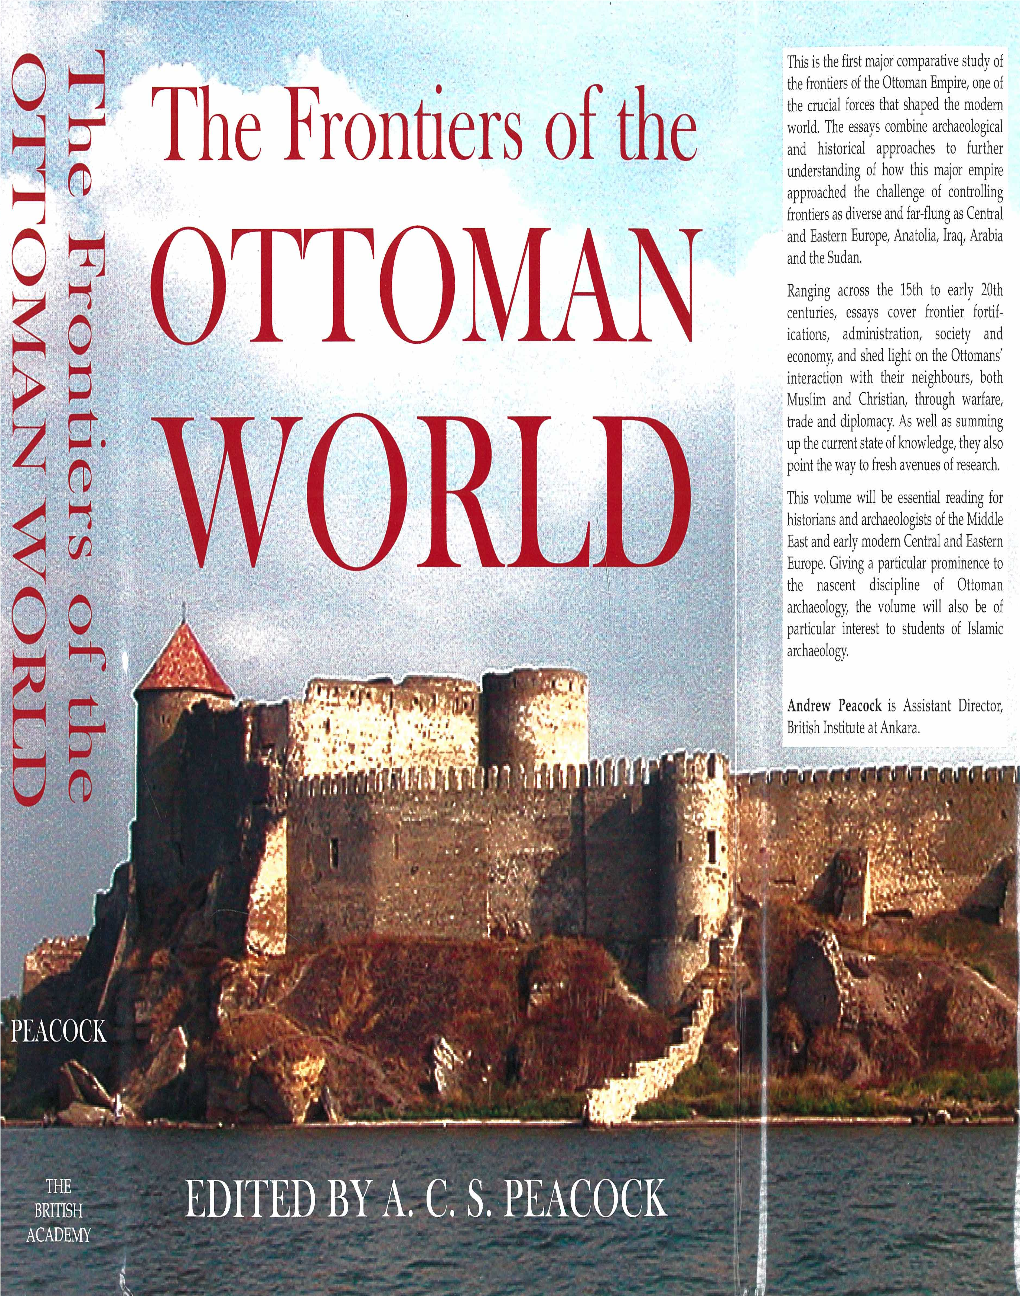 The Frontiers of the Ottoman World